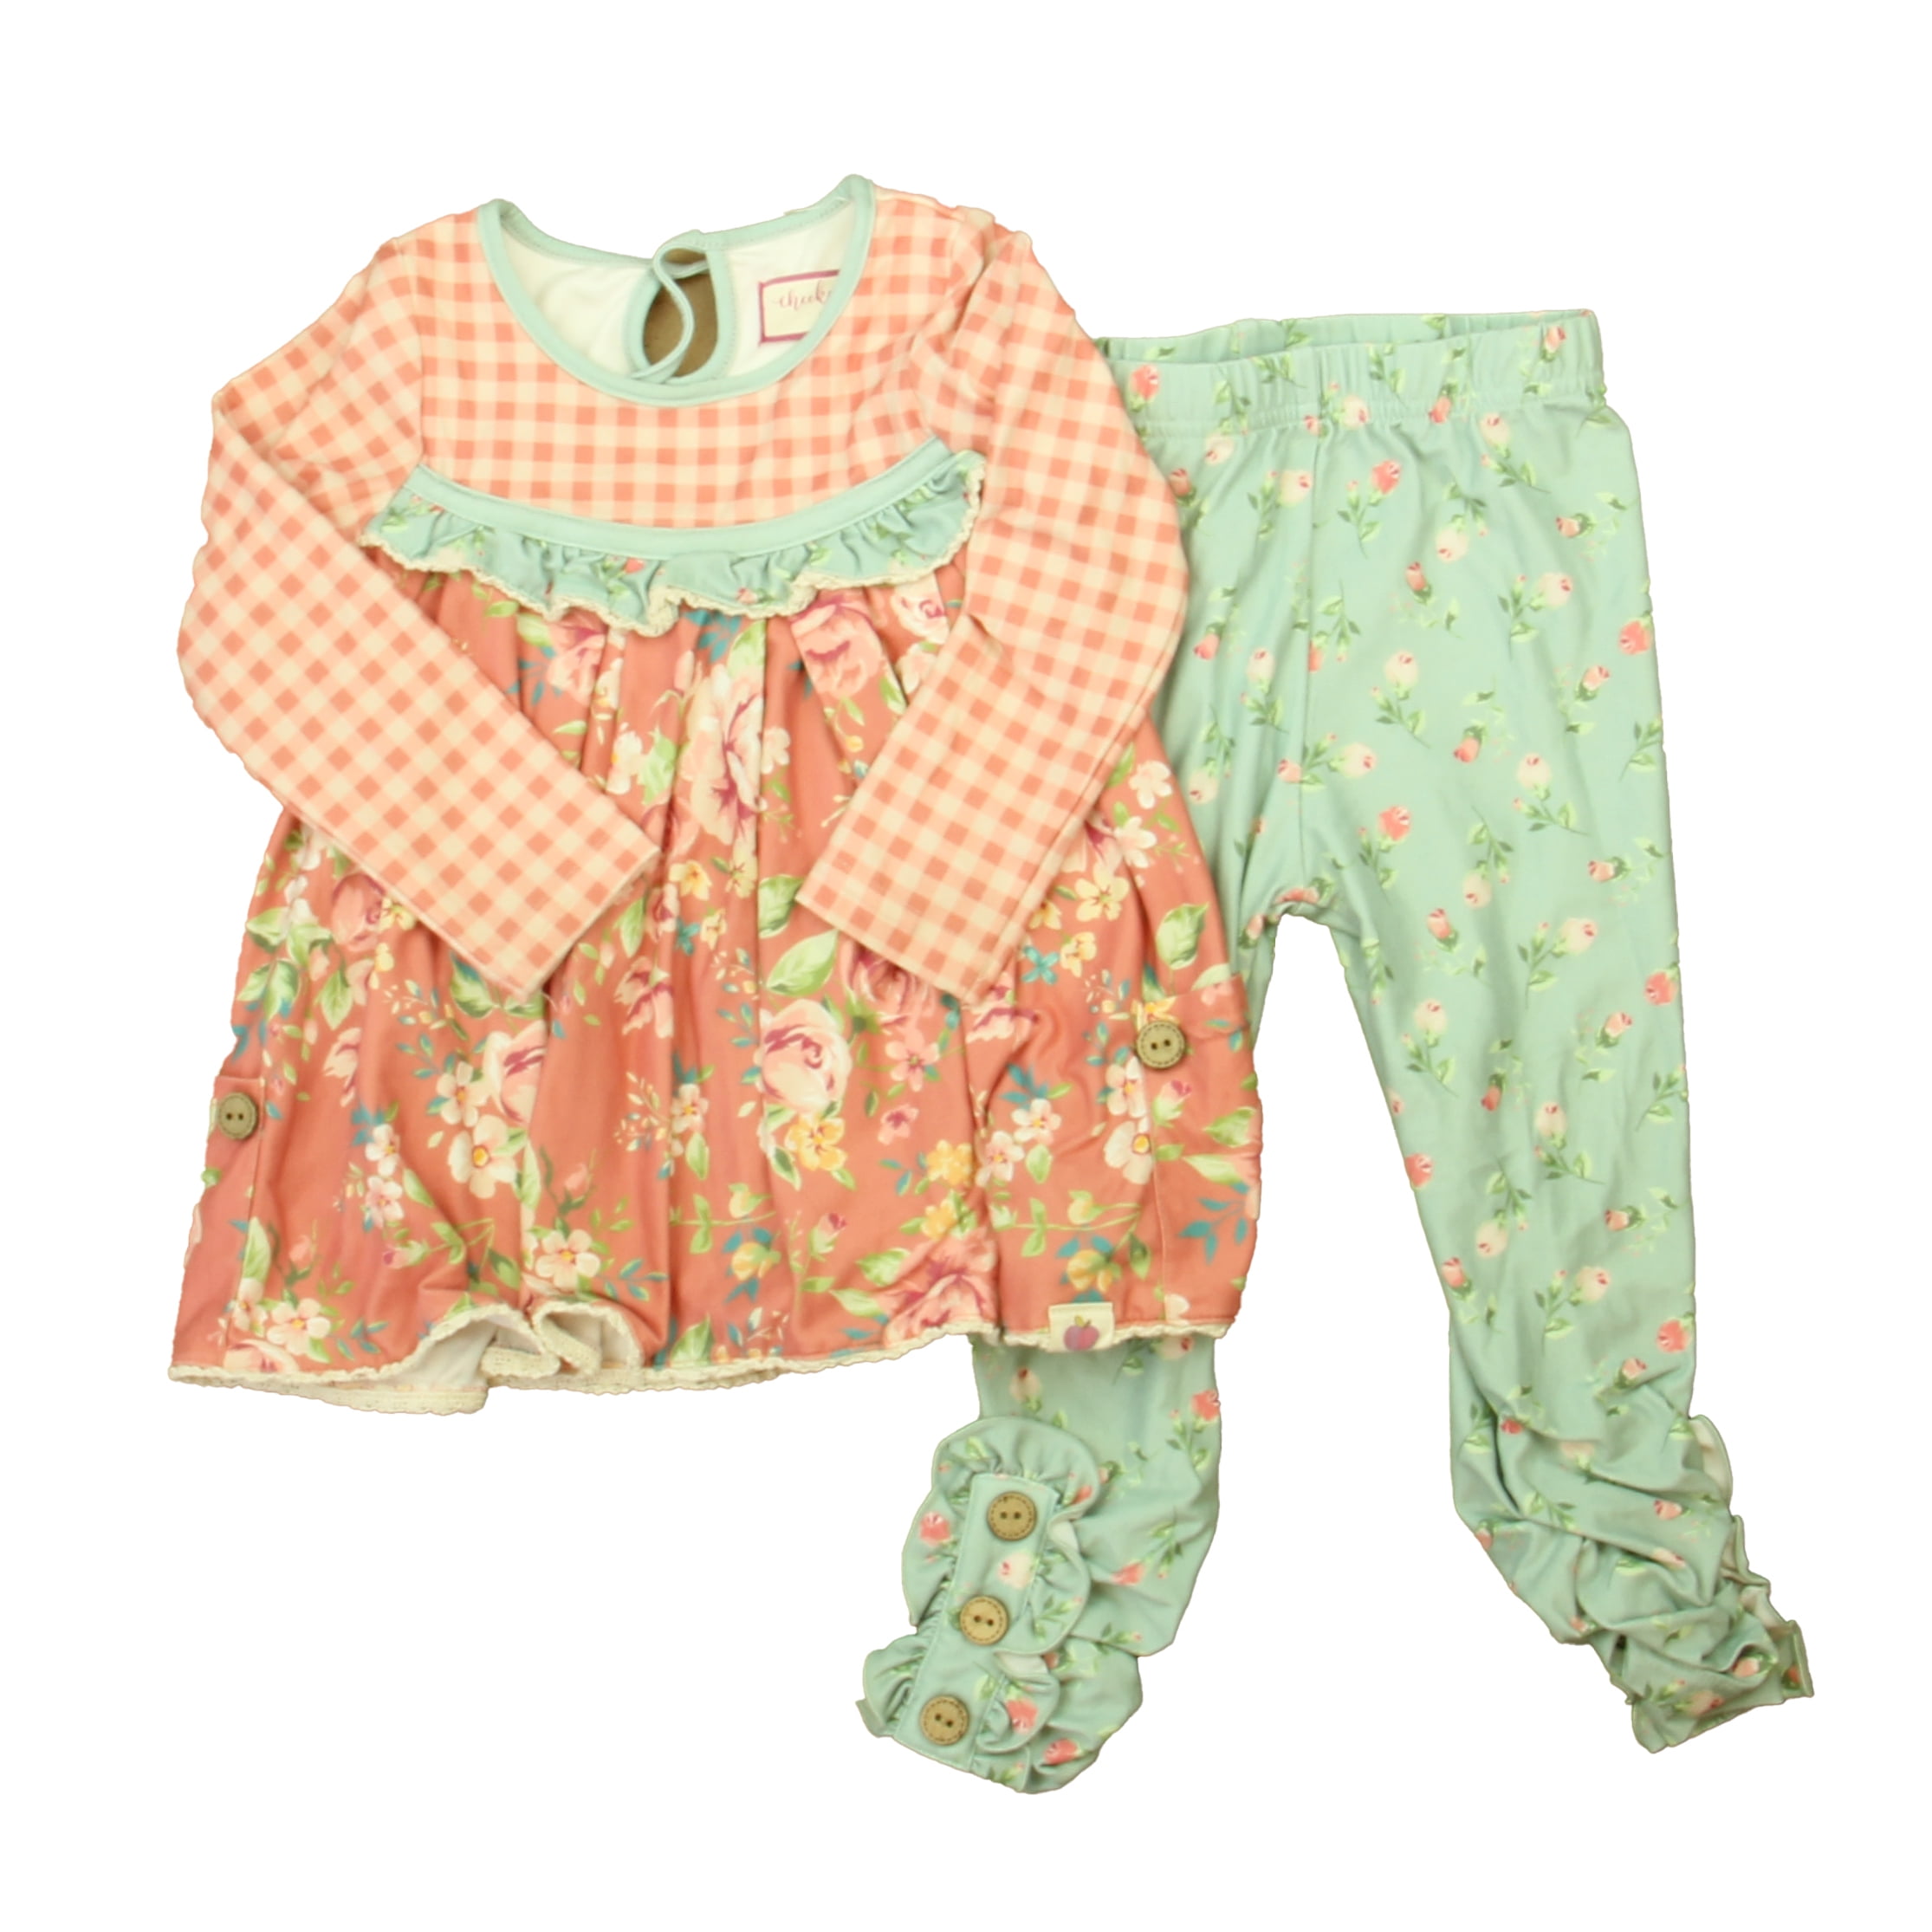 Pre-owned Cheeky Plum Girls Pink  Aqua Floral Apparel Sets size: 12-18  Months 